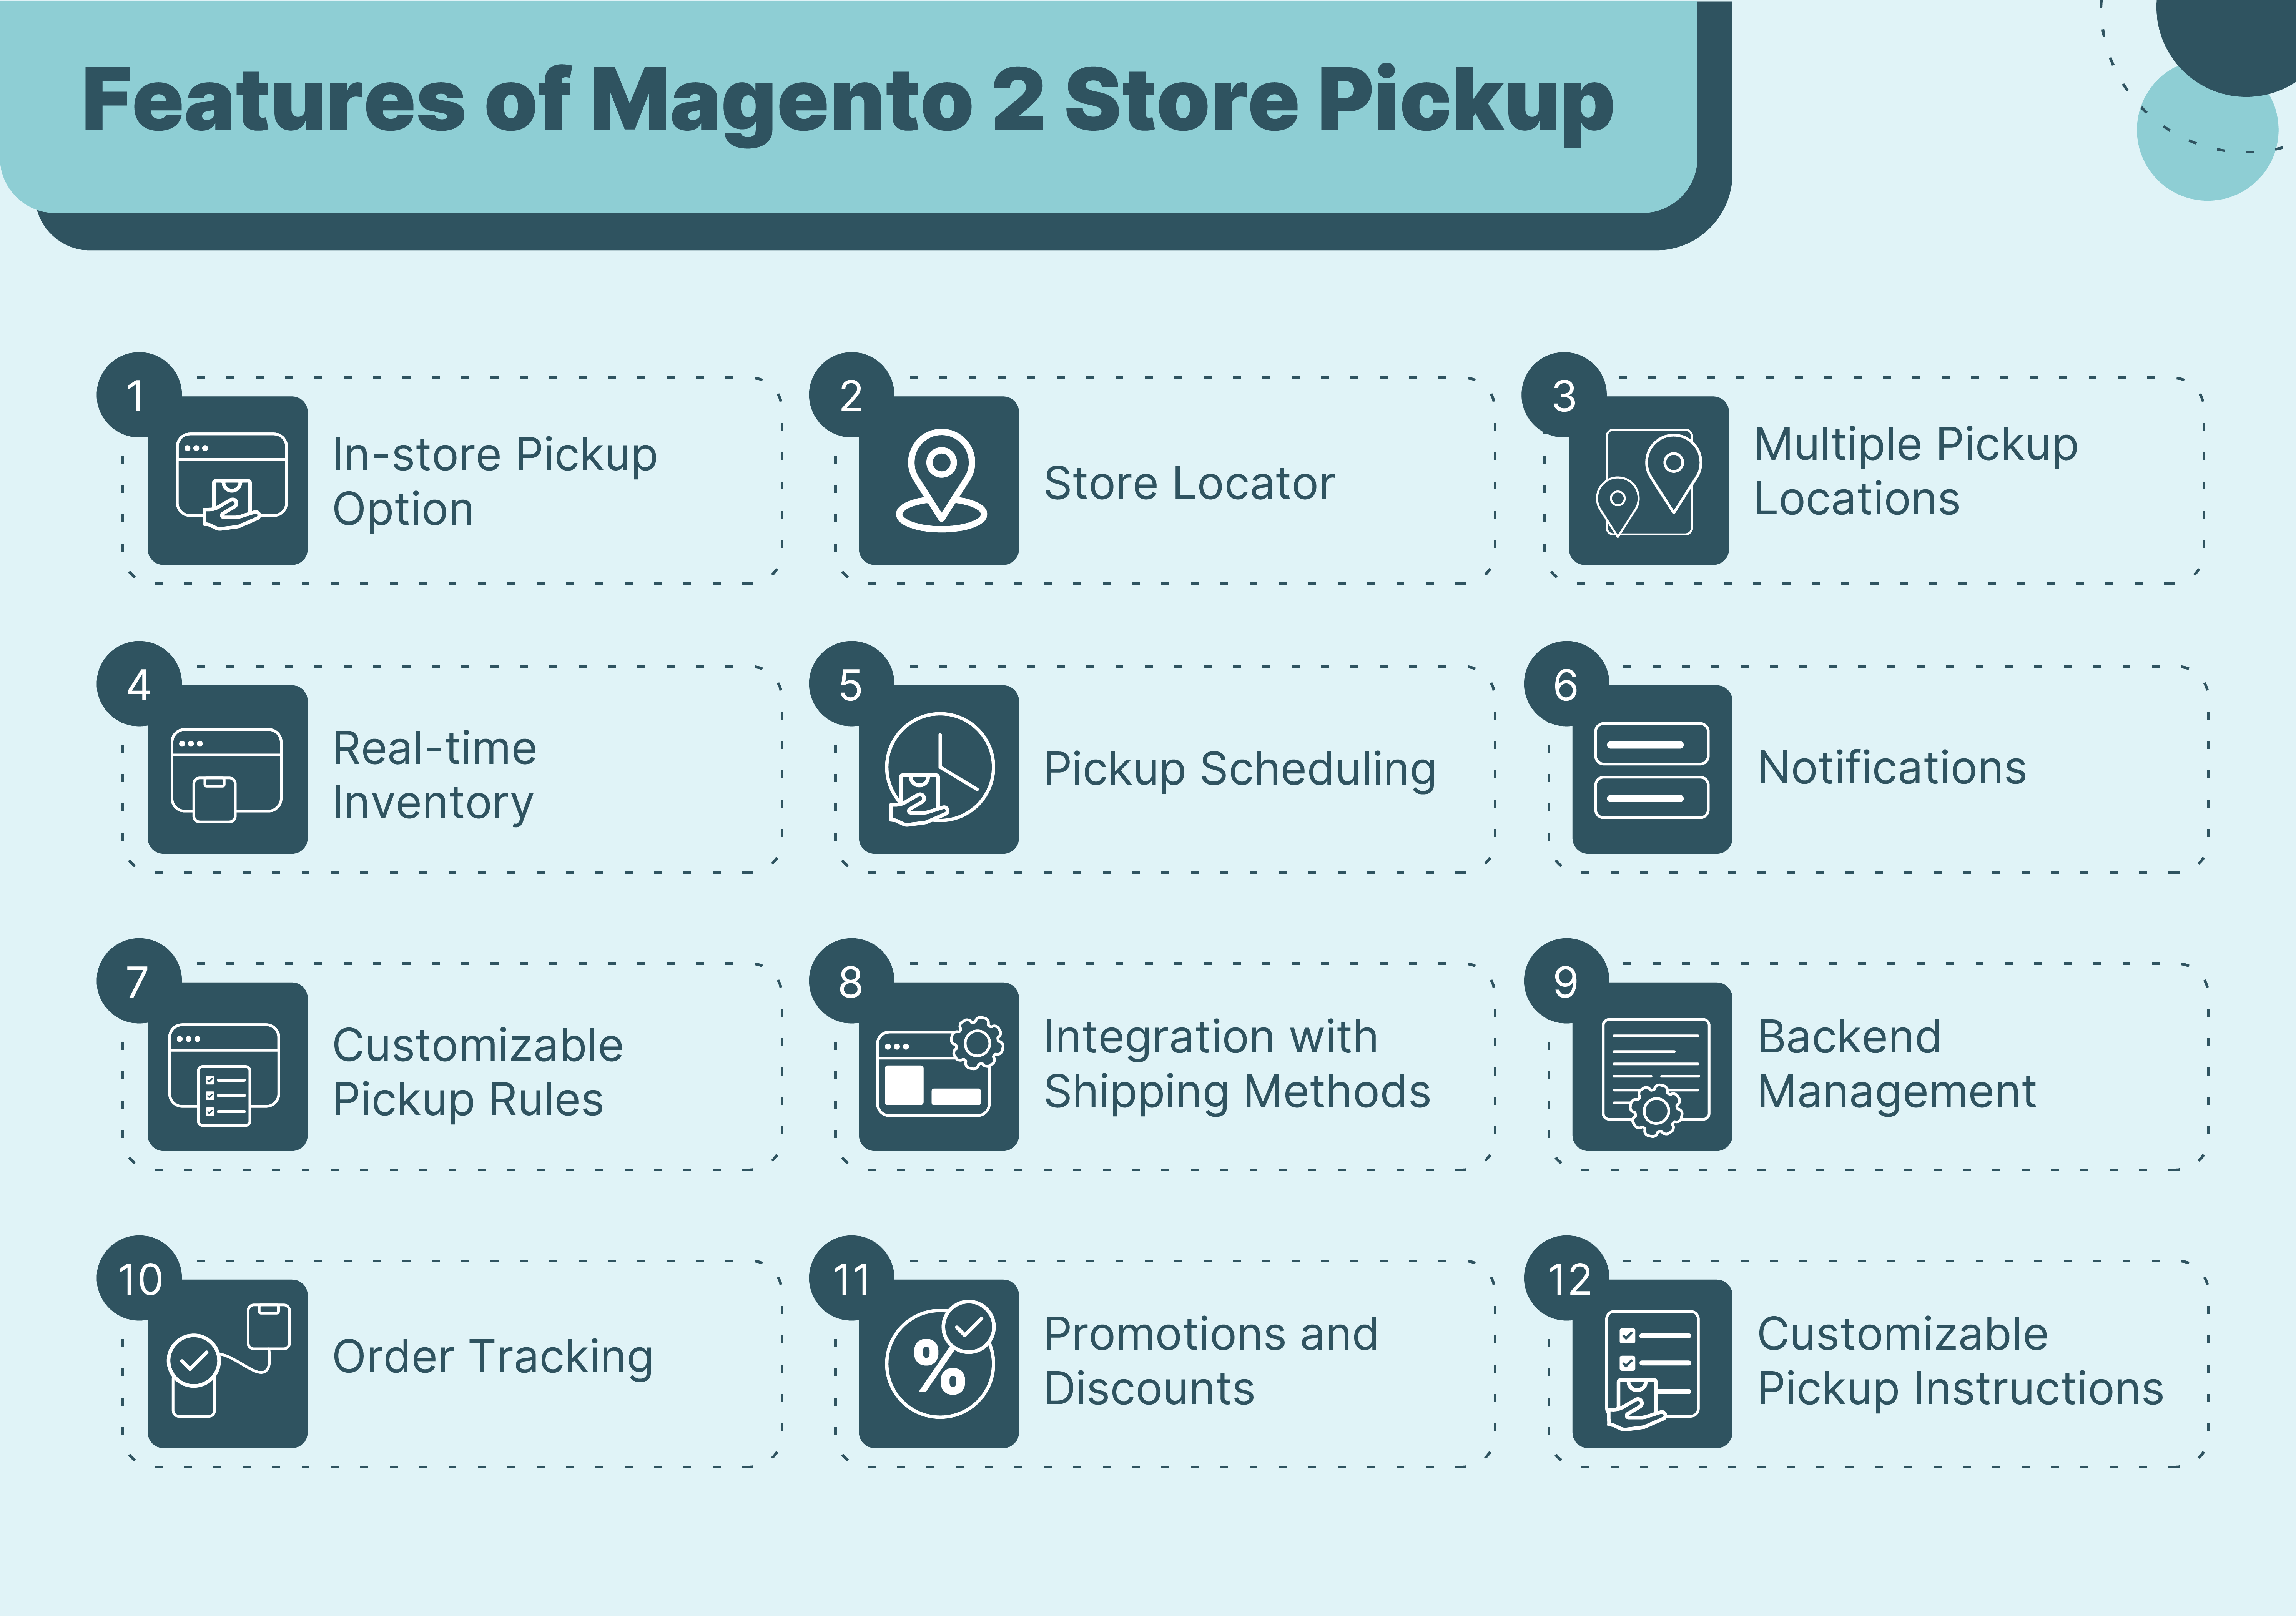 Features of Magento 2 Store Pickup